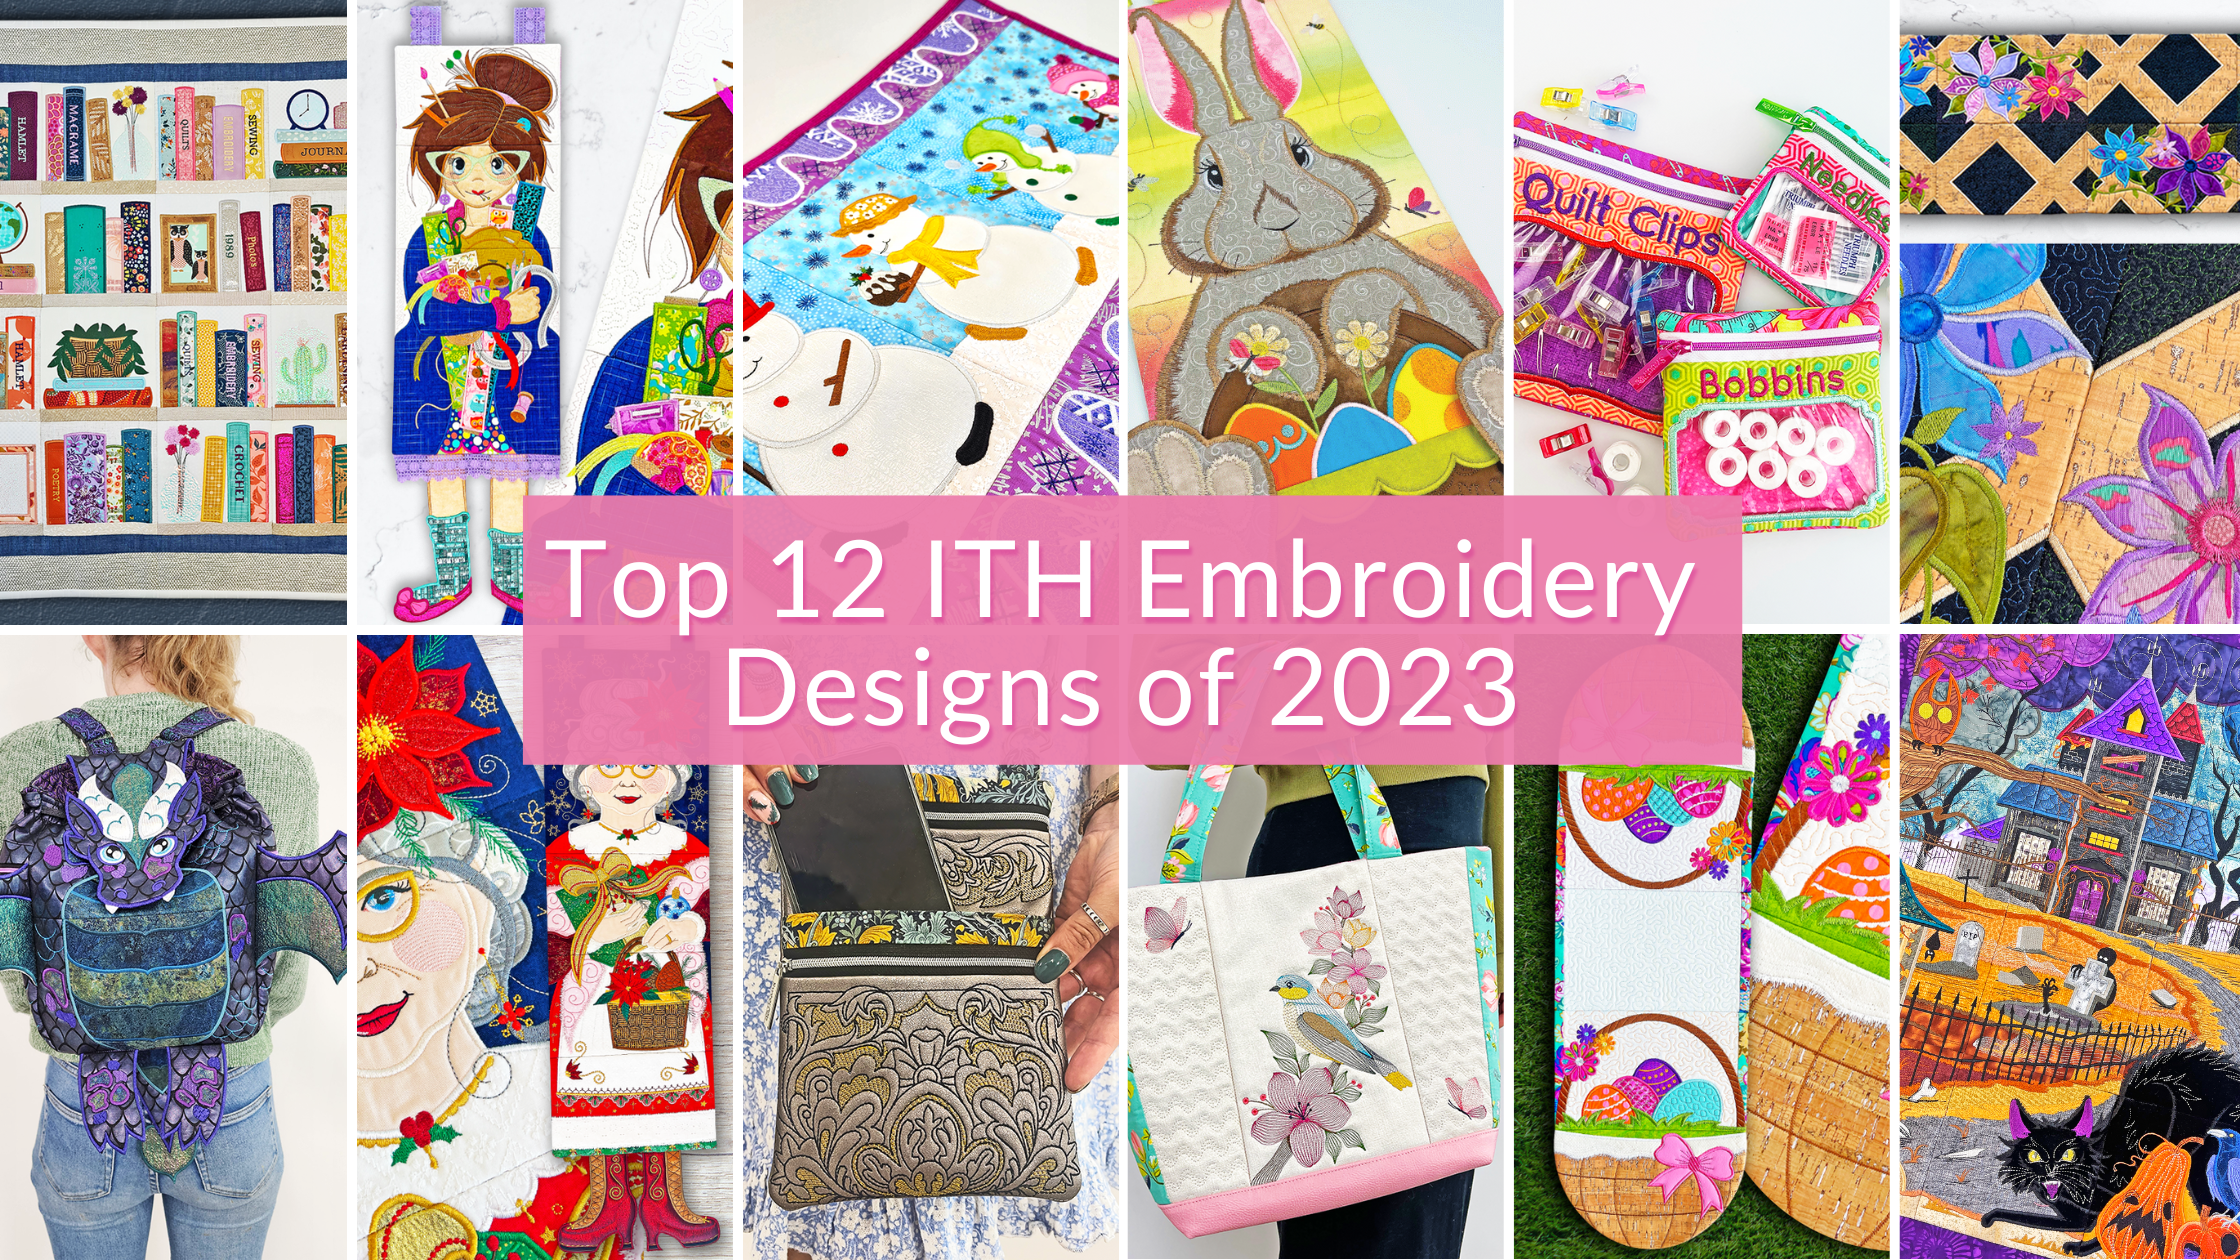 Top 12 ITH Embroidery Designs